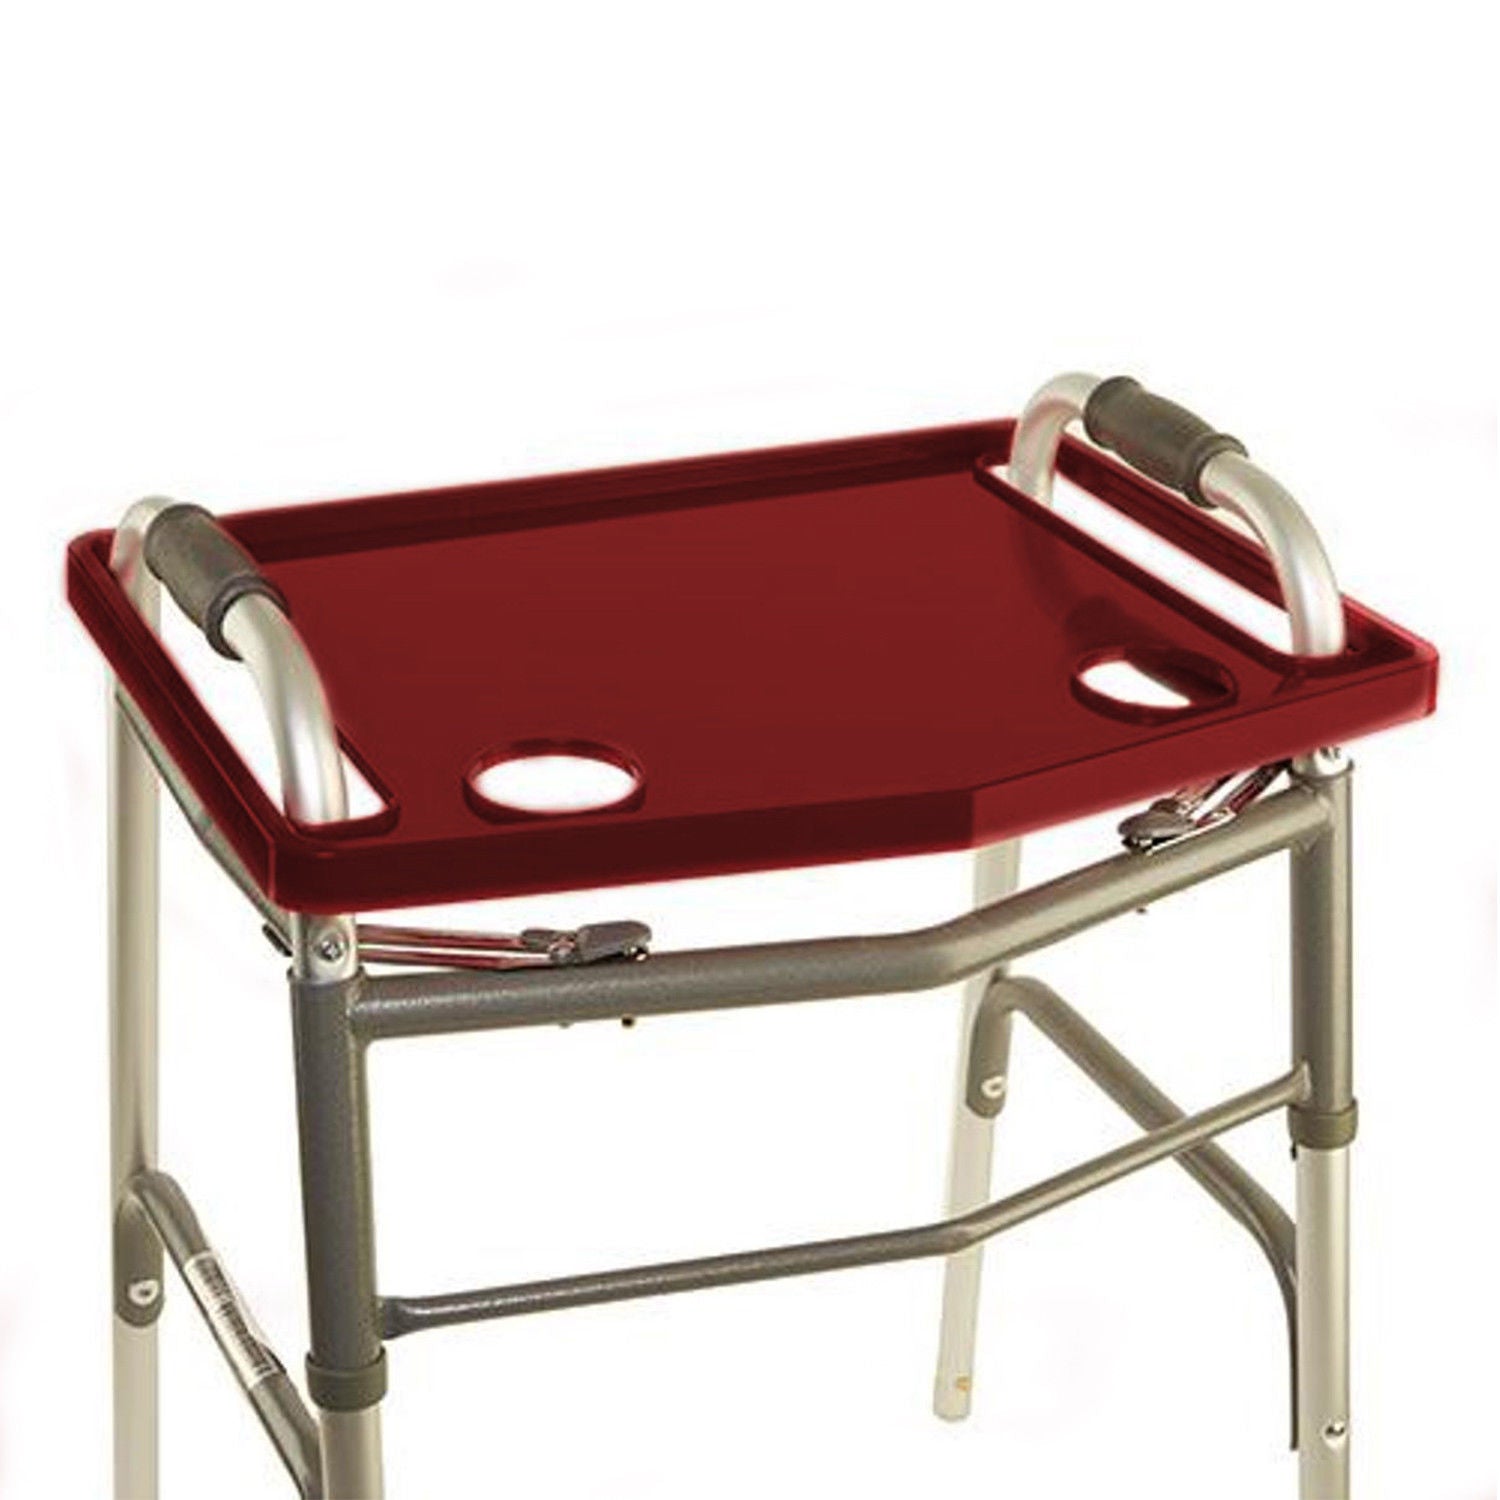 Red Walker Tray With Cup Holder – Universal Adult Walker Tray